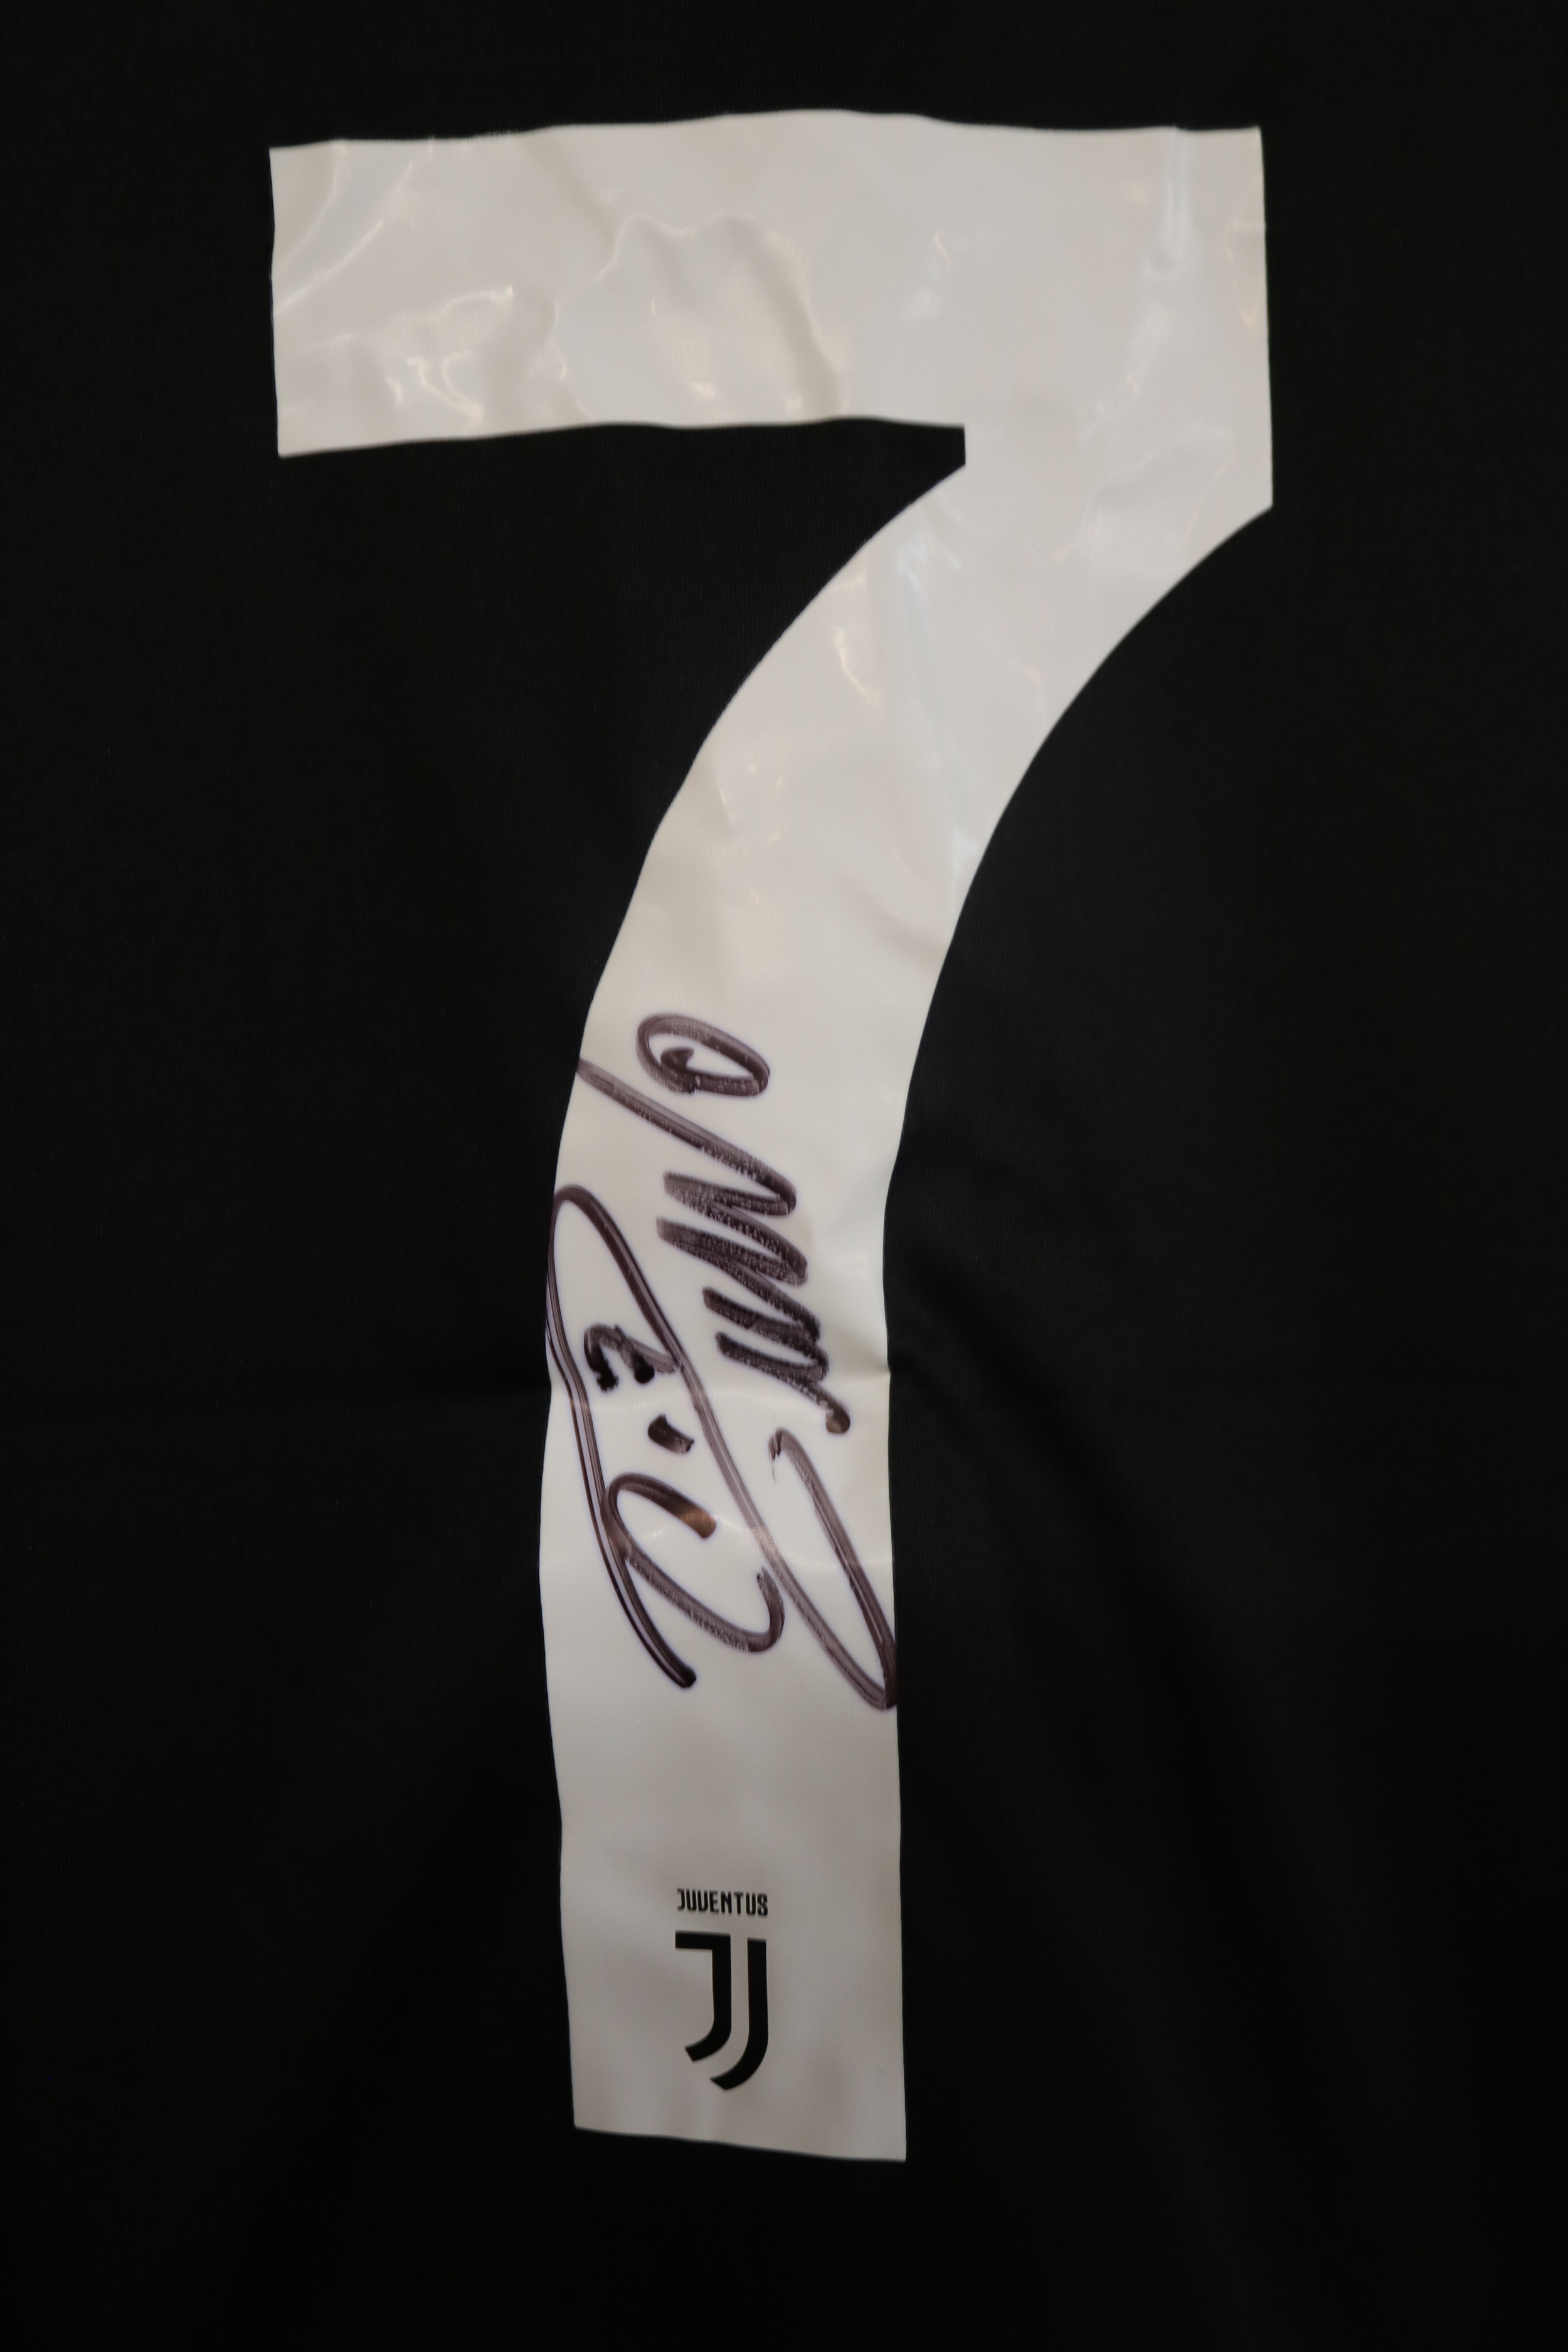 CRISTIANO RONALDO 2019/20 SIGNED JUVENTUS JERSEY This jersey comes with a letter of authenticity - Image 6 of 8